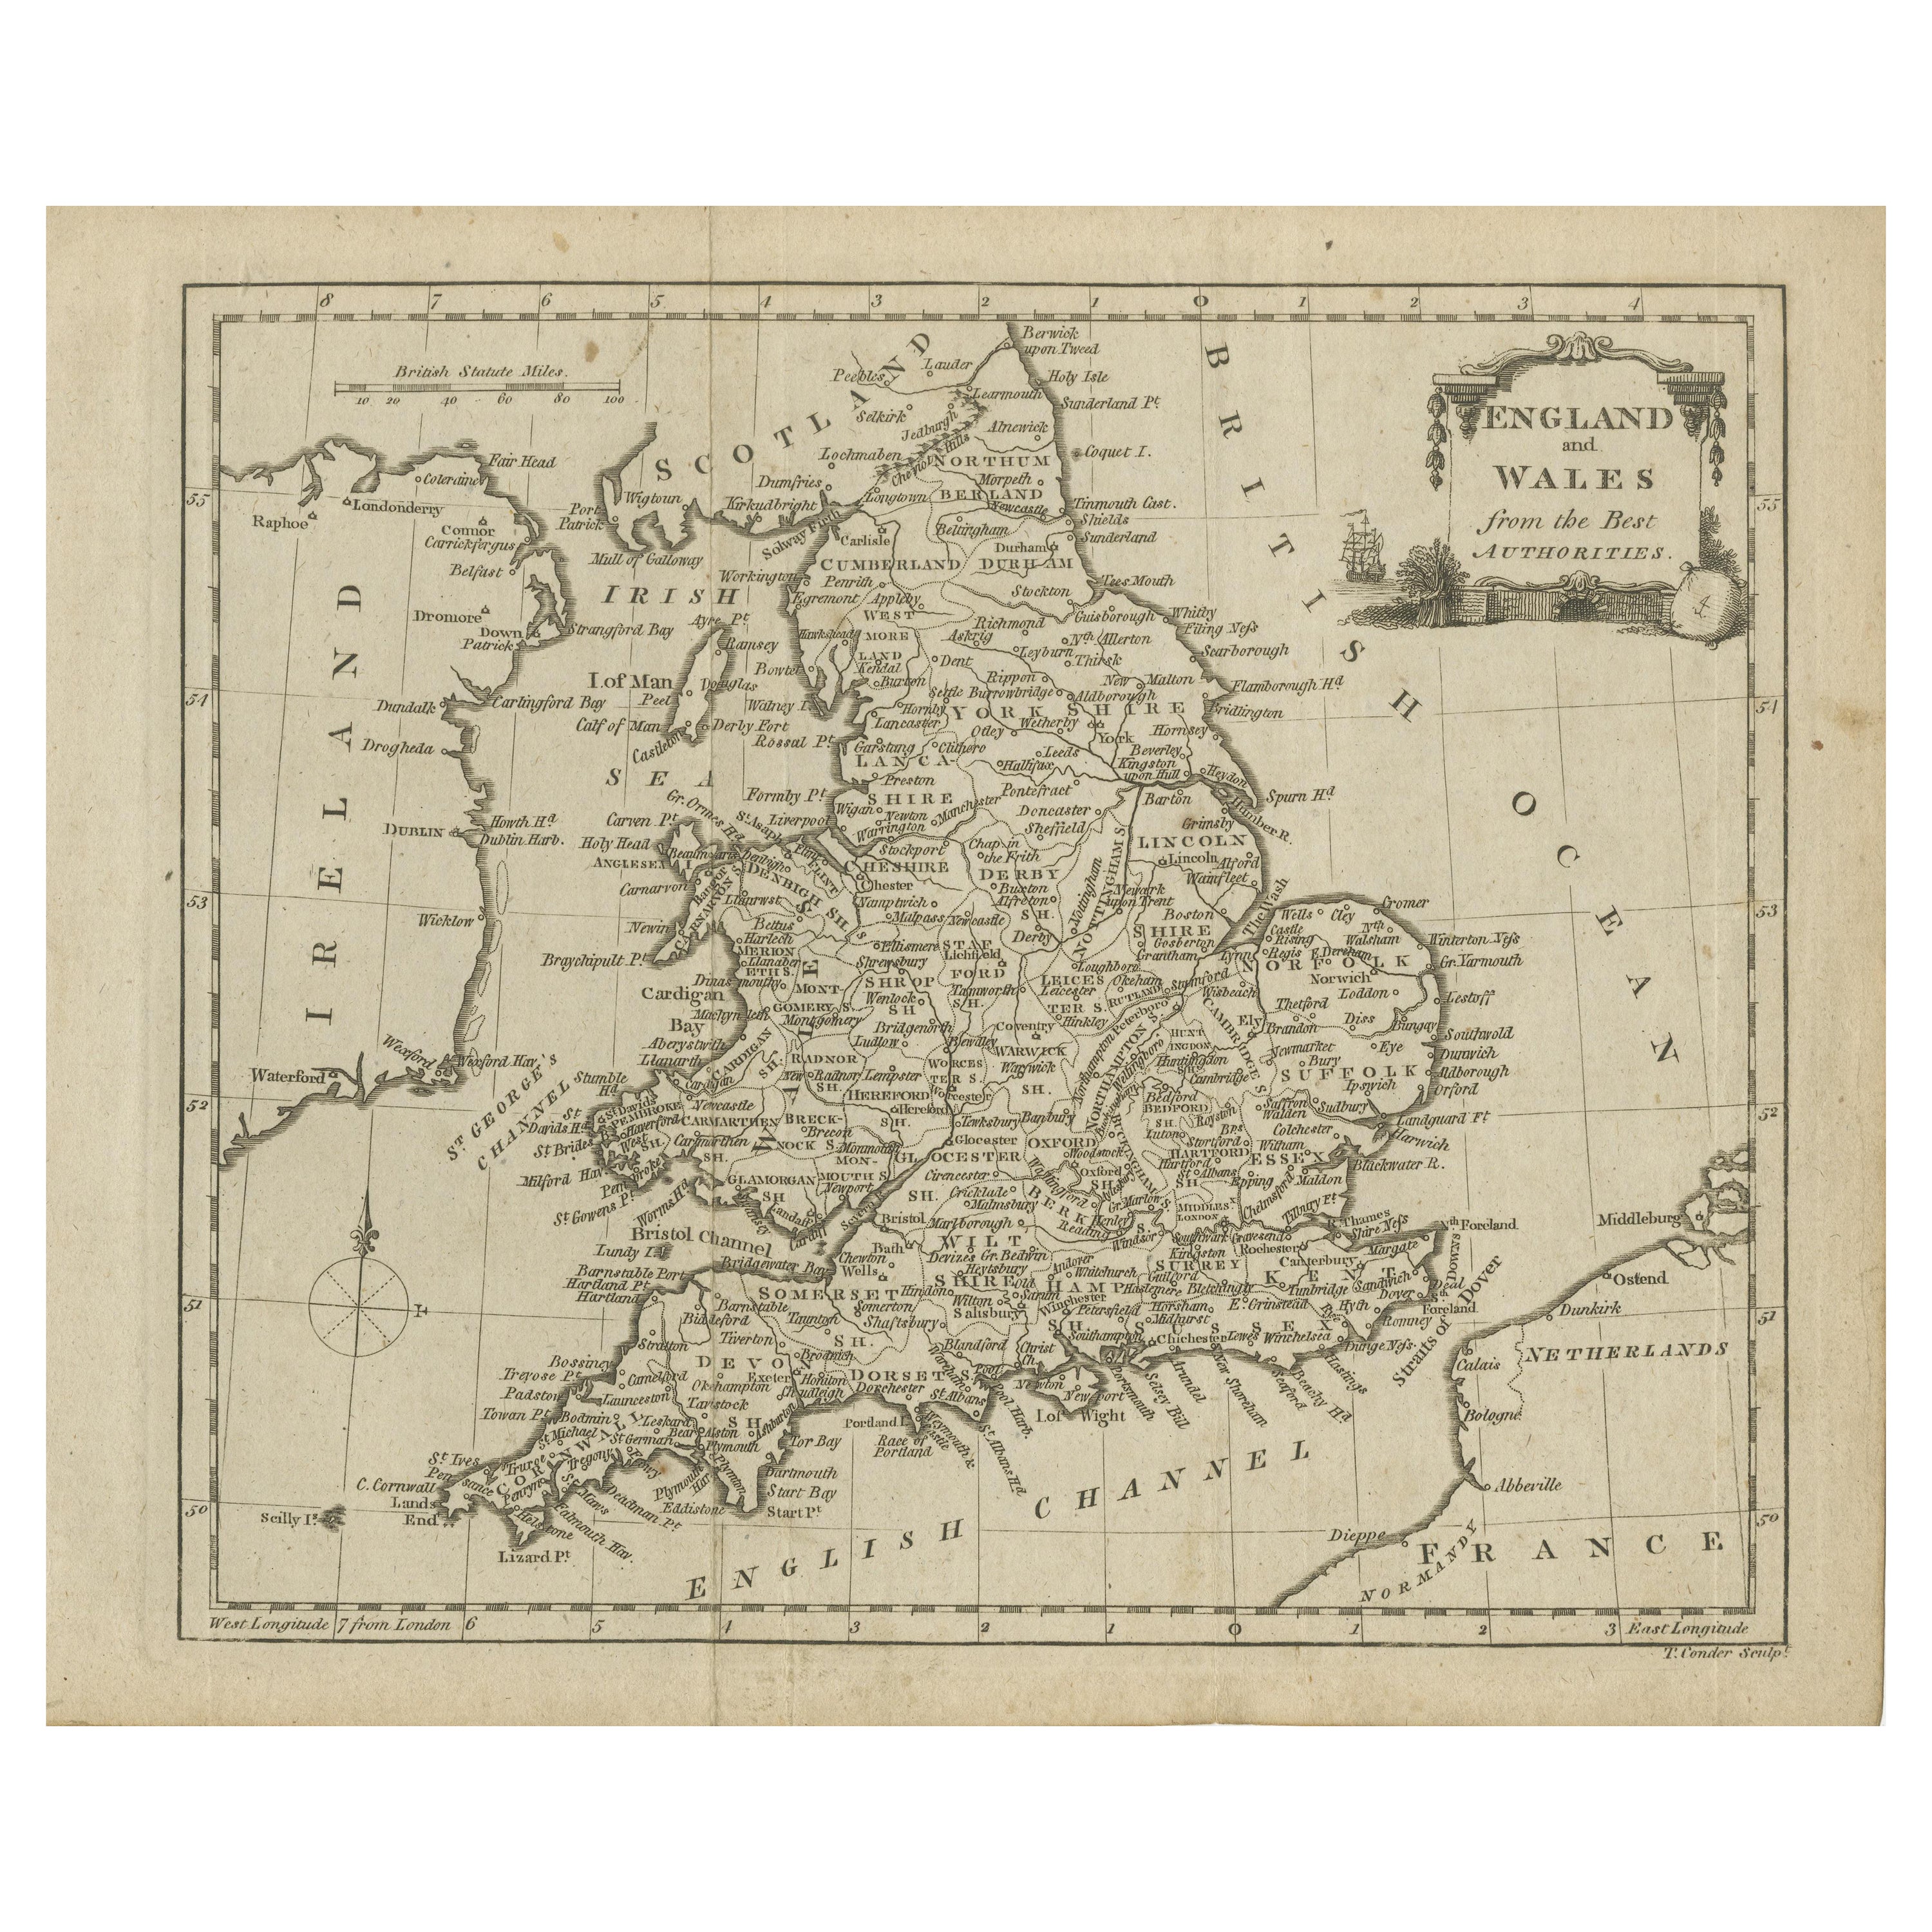 Original Antique Map of England and Wales, with Decorative Cartouche For Sale